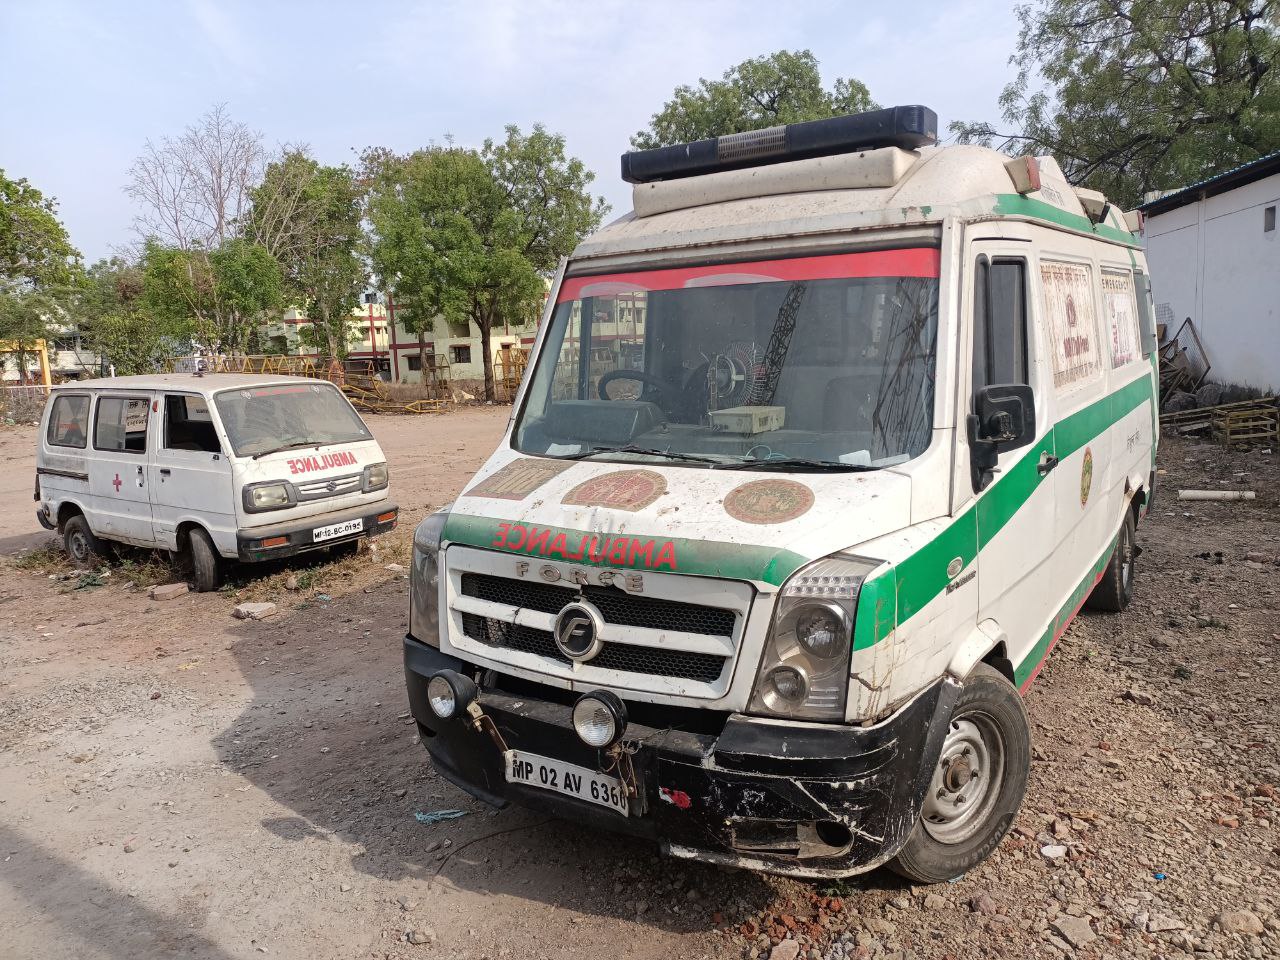 Ambulances : 15 out of 28 ambulances damaged in this district of MP